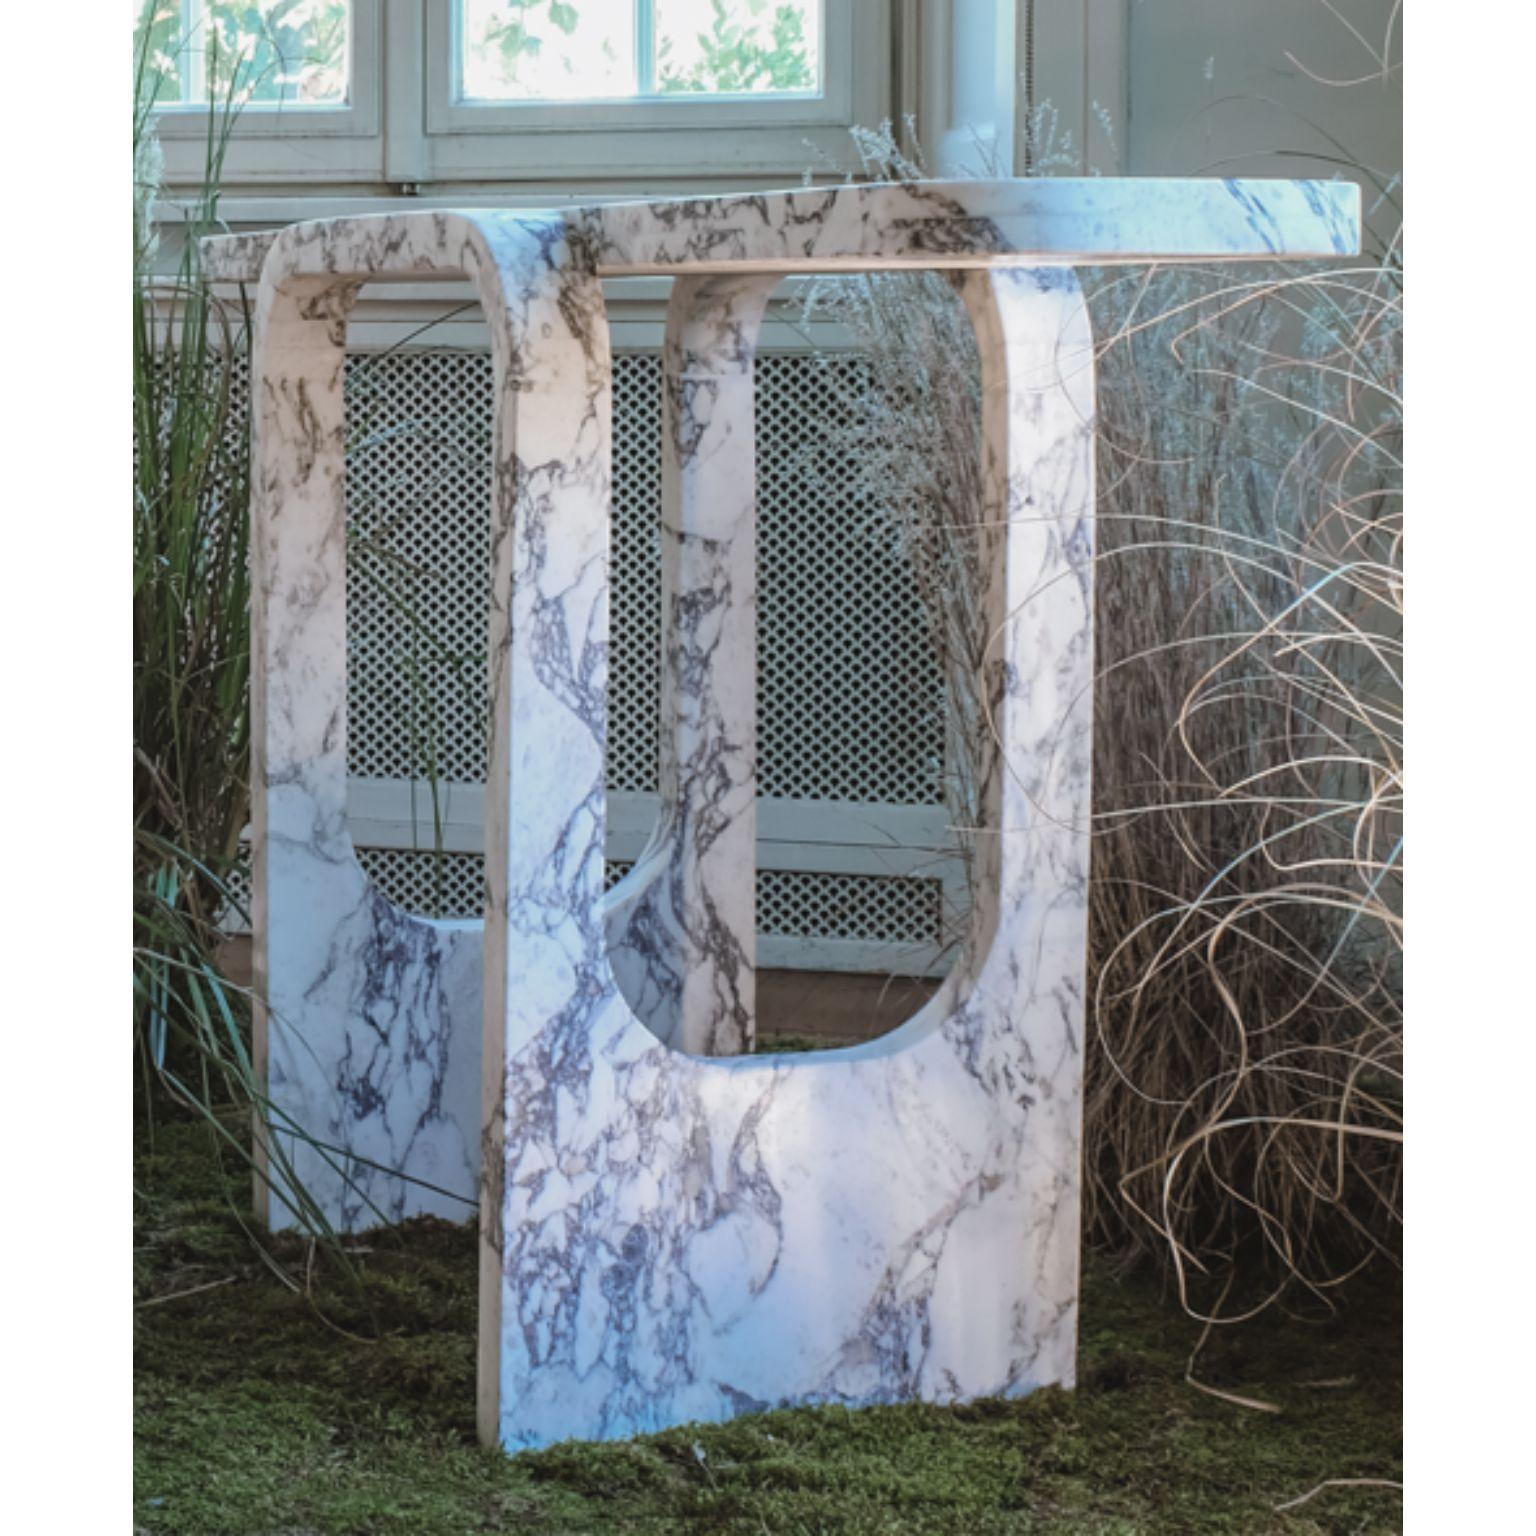 Cut and fold console by dAM Atelier
One of a kind.
Dimensions: L 147 x W 42 x H 80 cm.
Materials: Calacatta Viola marble.

Cutting and folding means creating a whole new element through the sequence of two simple actions. Starting from a